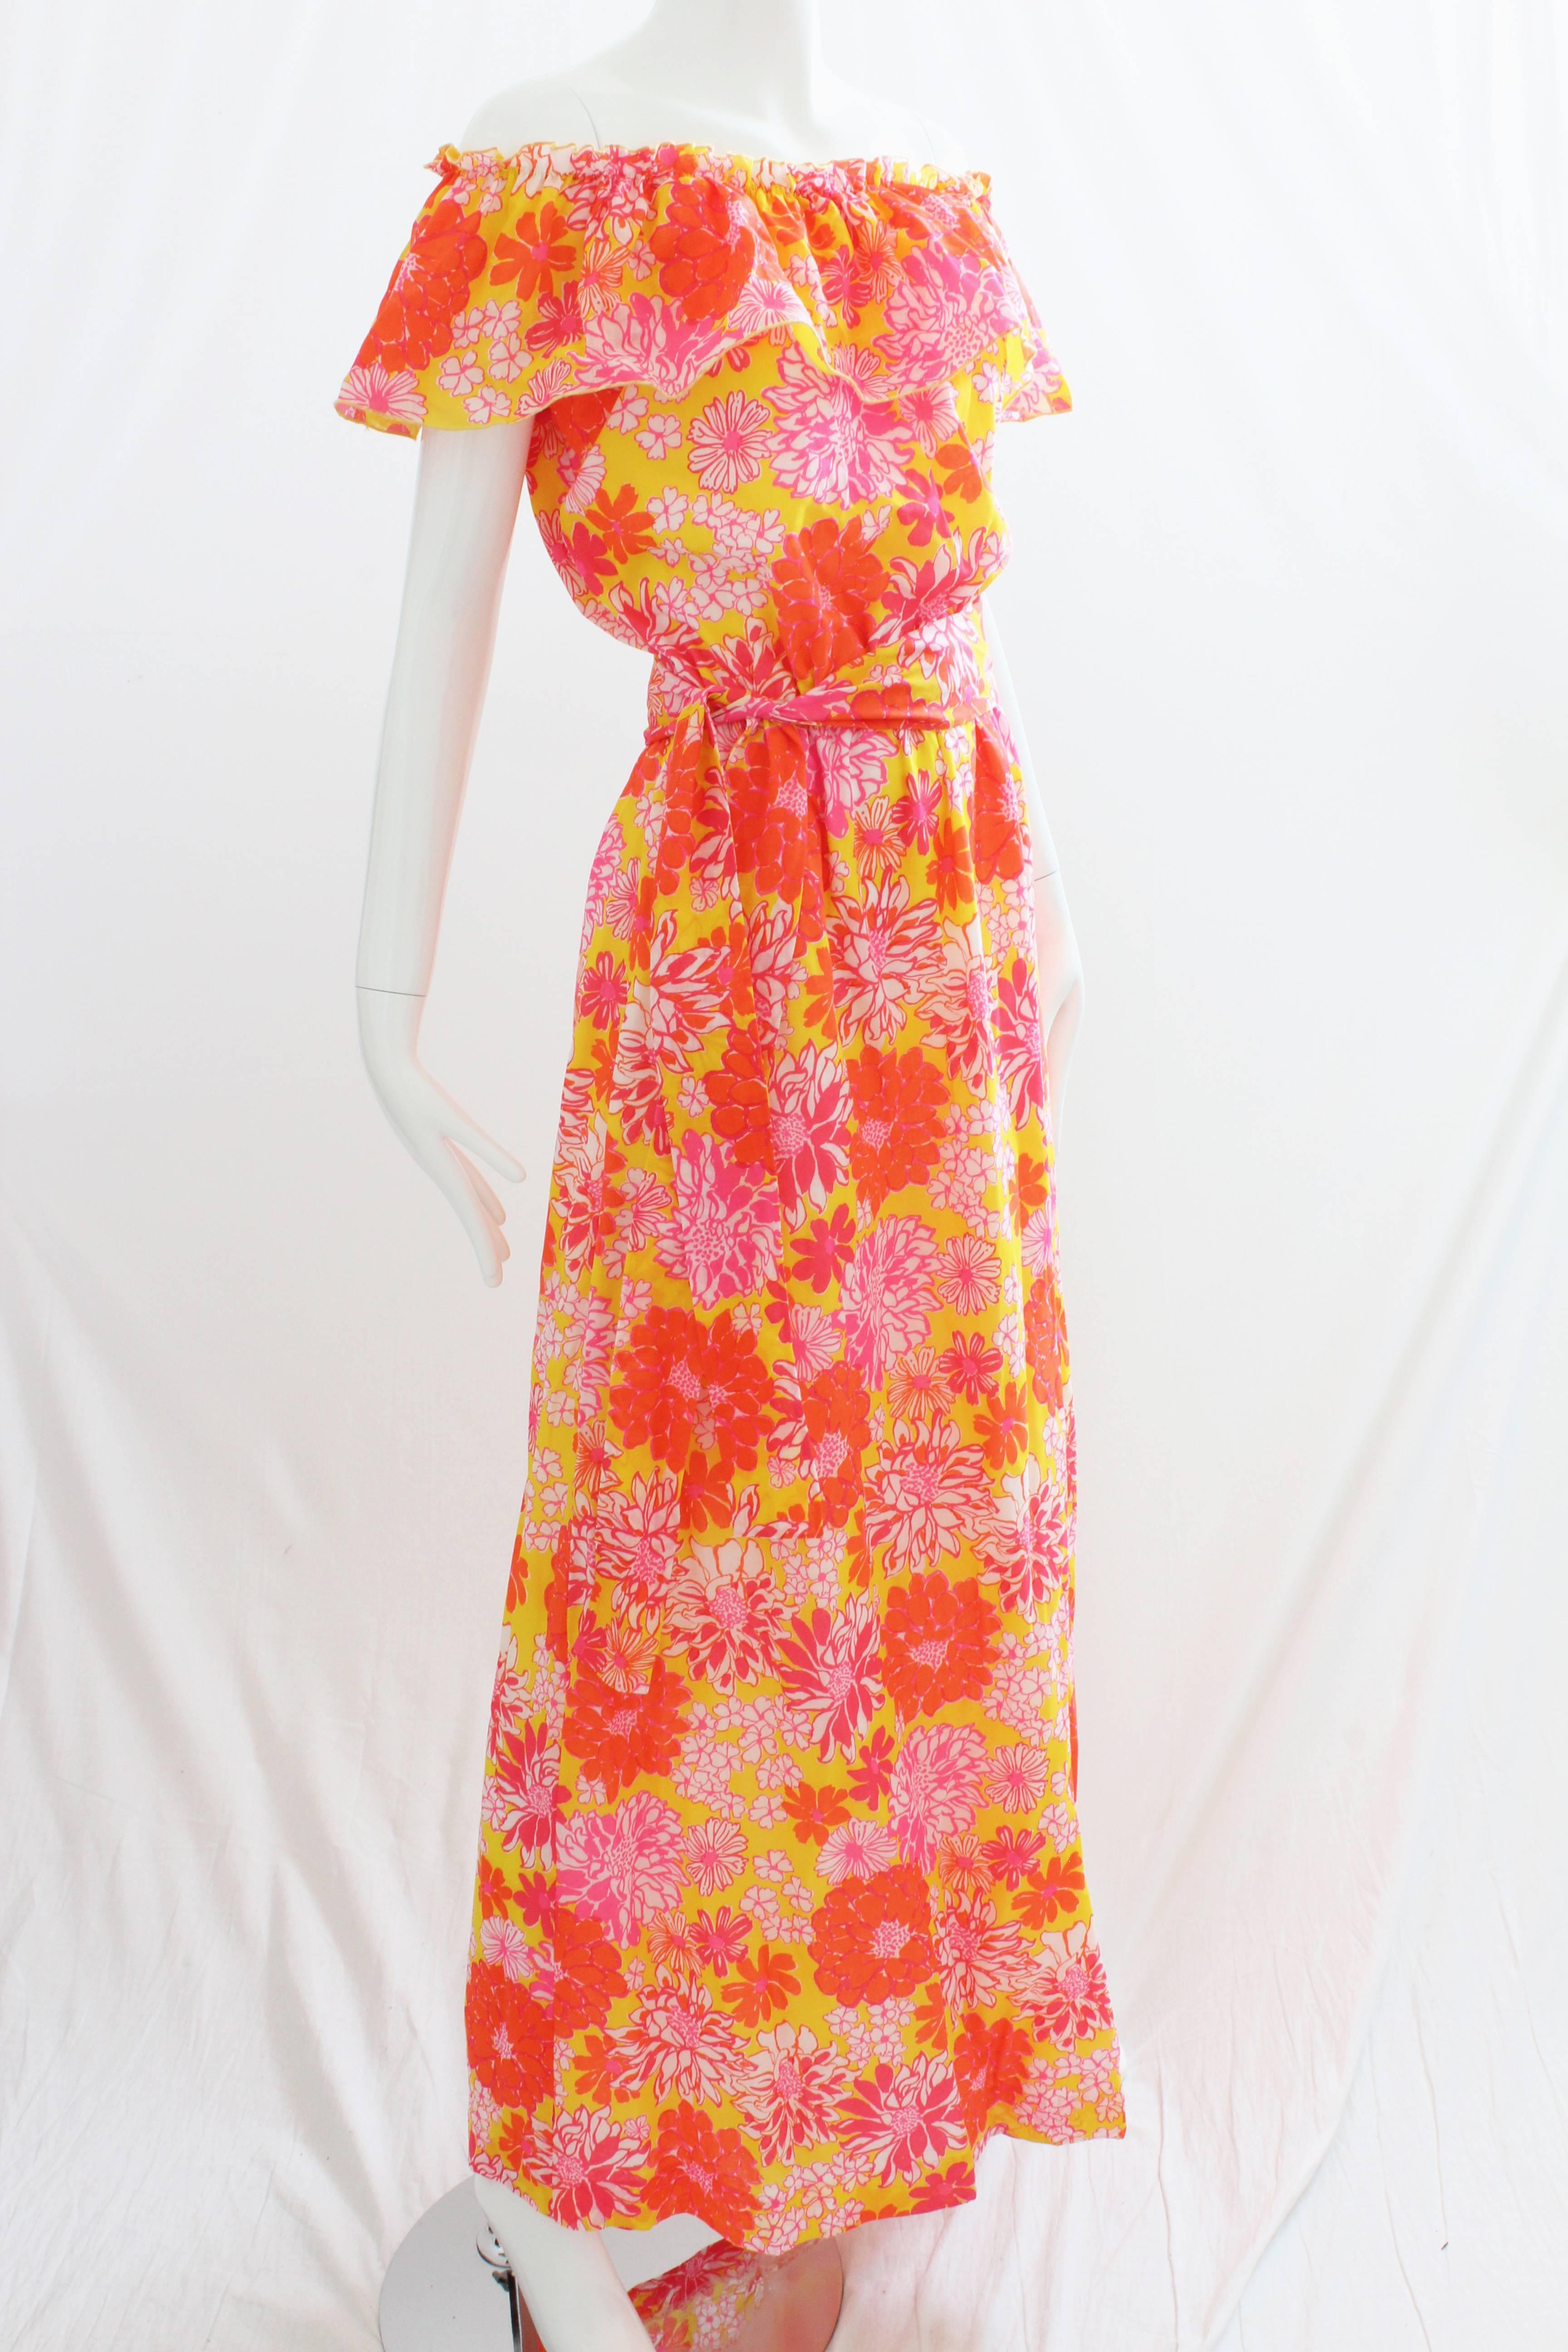 Women's Lilly Pulitzer Floral Maxi Dress with Off Shoulder Ruffle Trim and Sash, 1970s